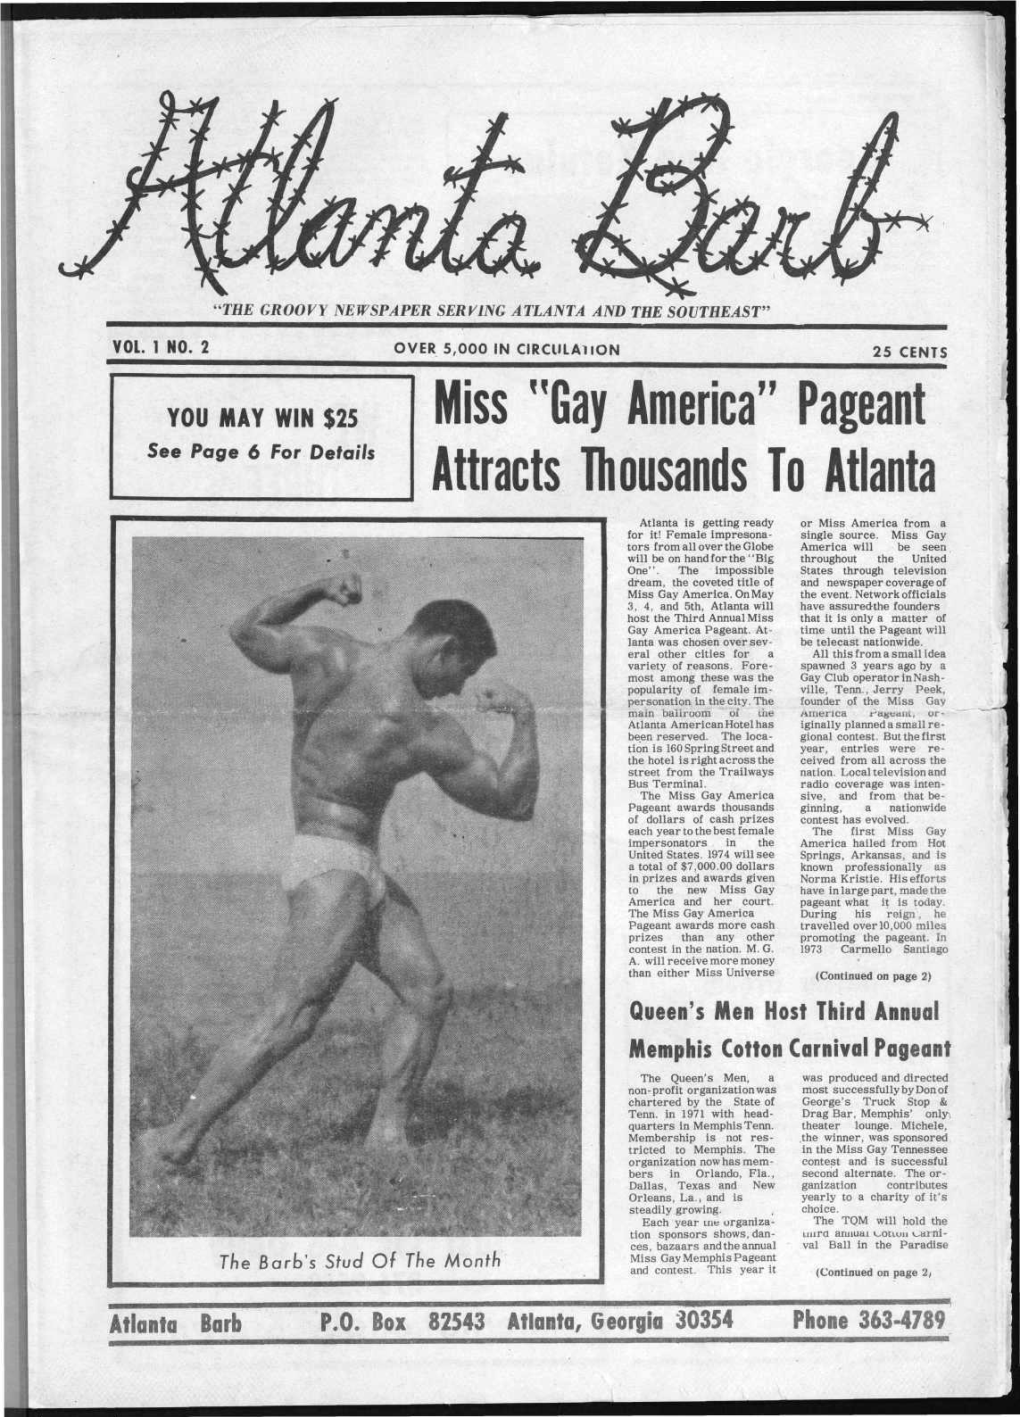 Miss "Gay America" Pageant See Page 6 for Details Attracts Thousands to Atlanta